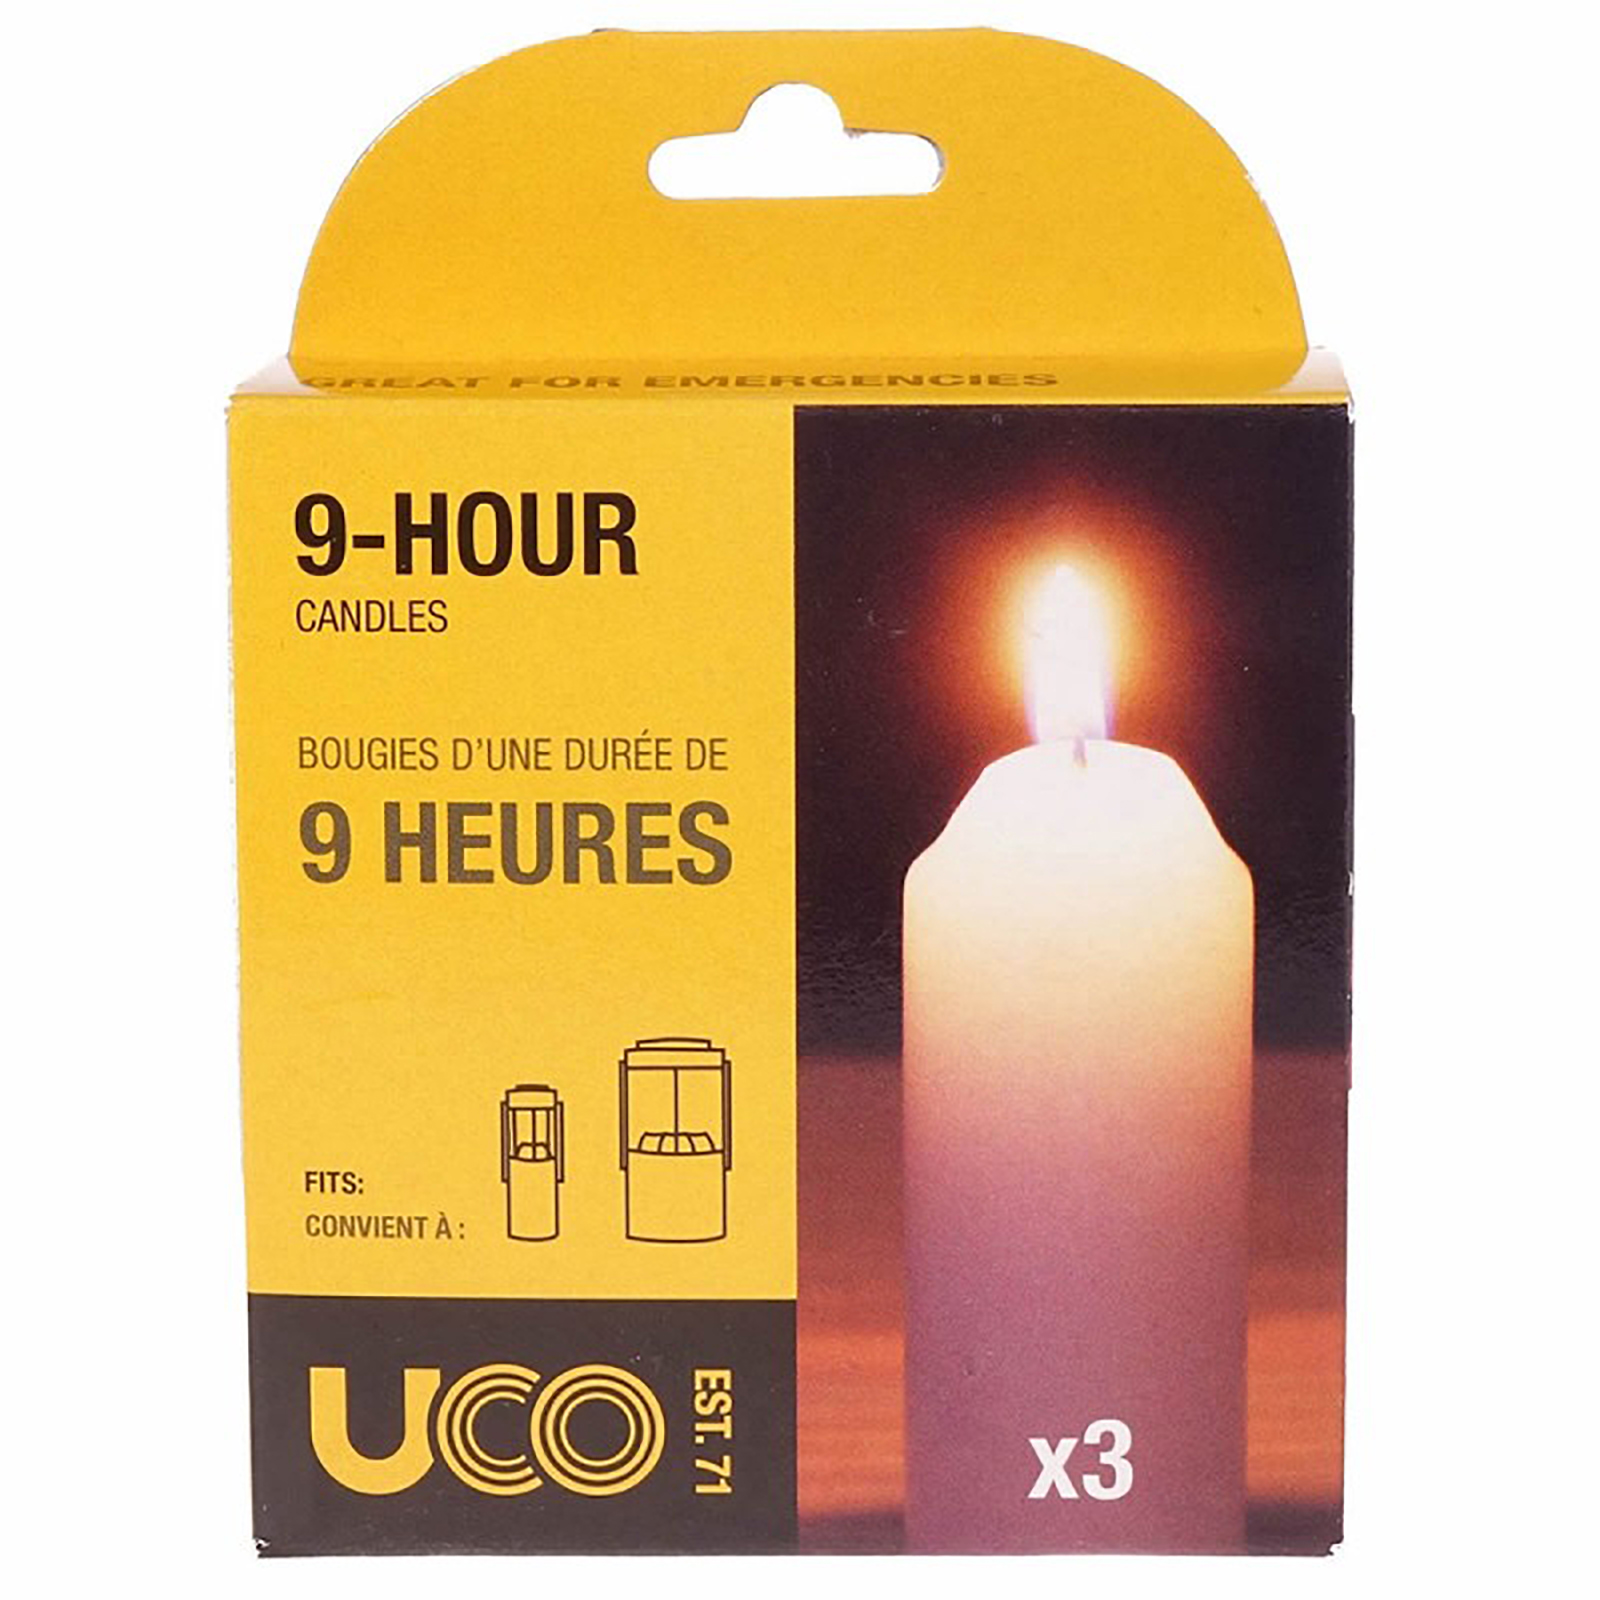 UCO 9-Hour Candles 